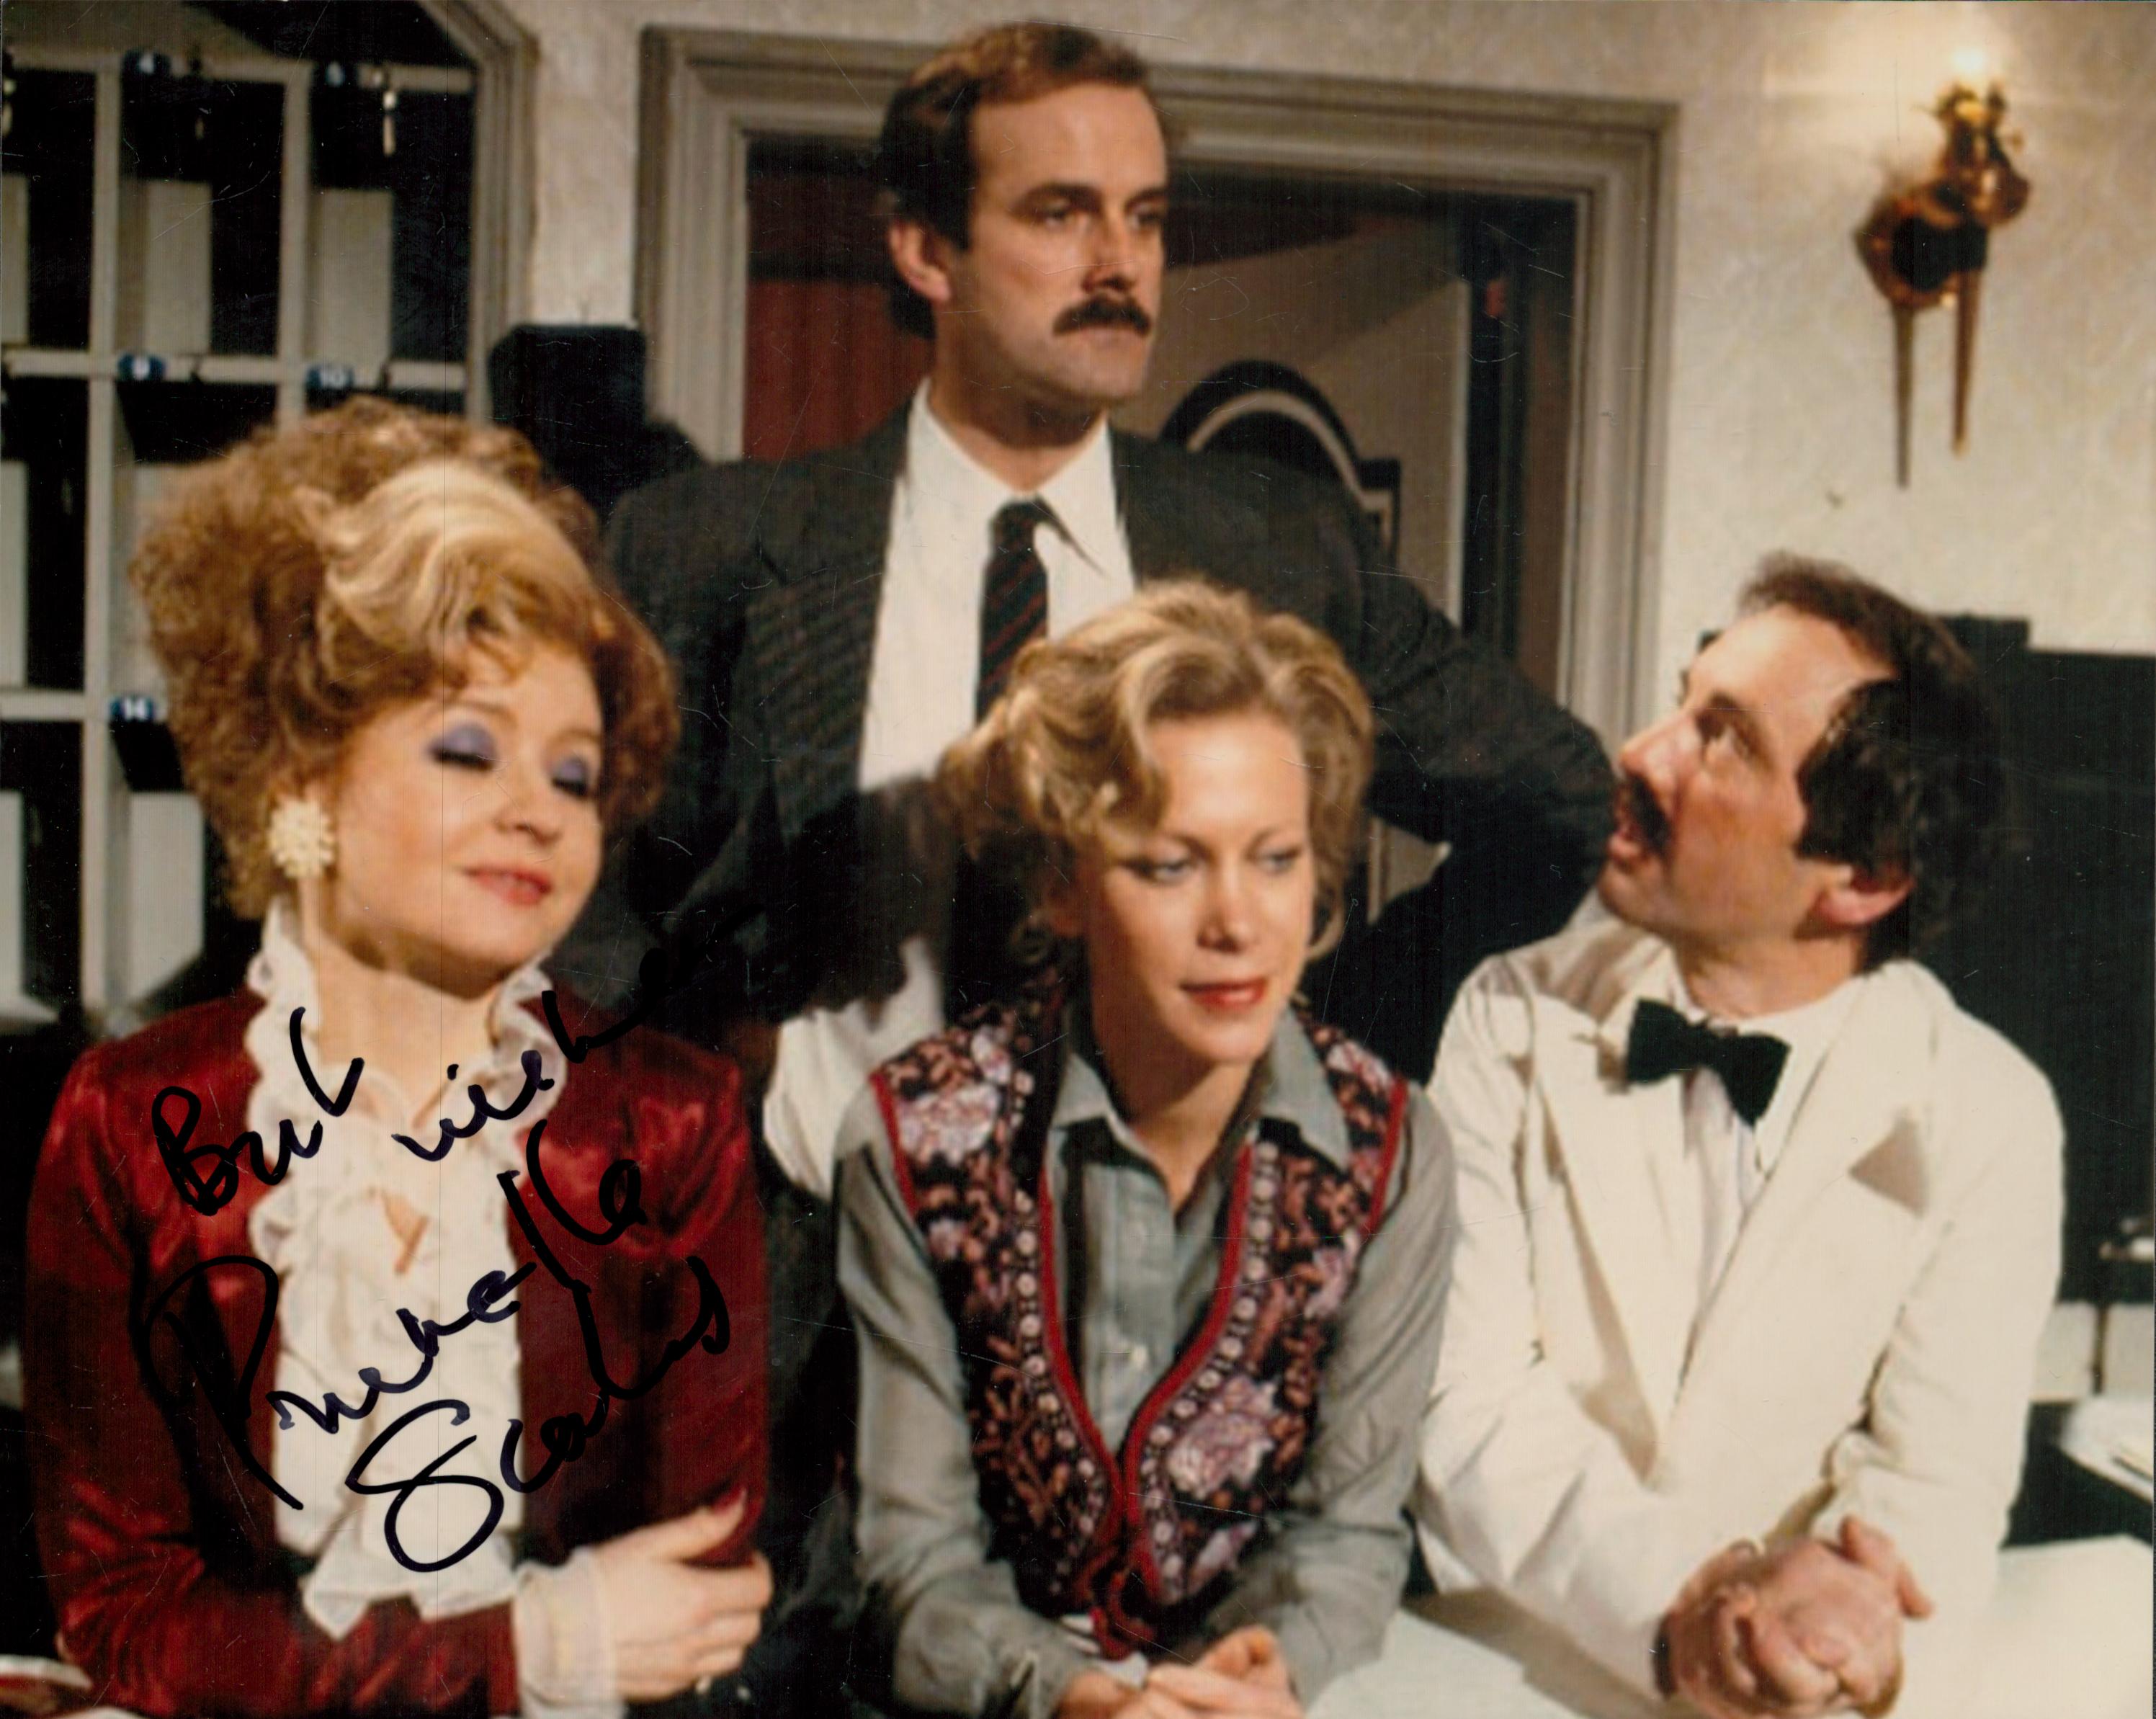 Fawlty Towers Prunella Scales signed superb 10 x 8 inch colour photo as Sibil with all the stars.